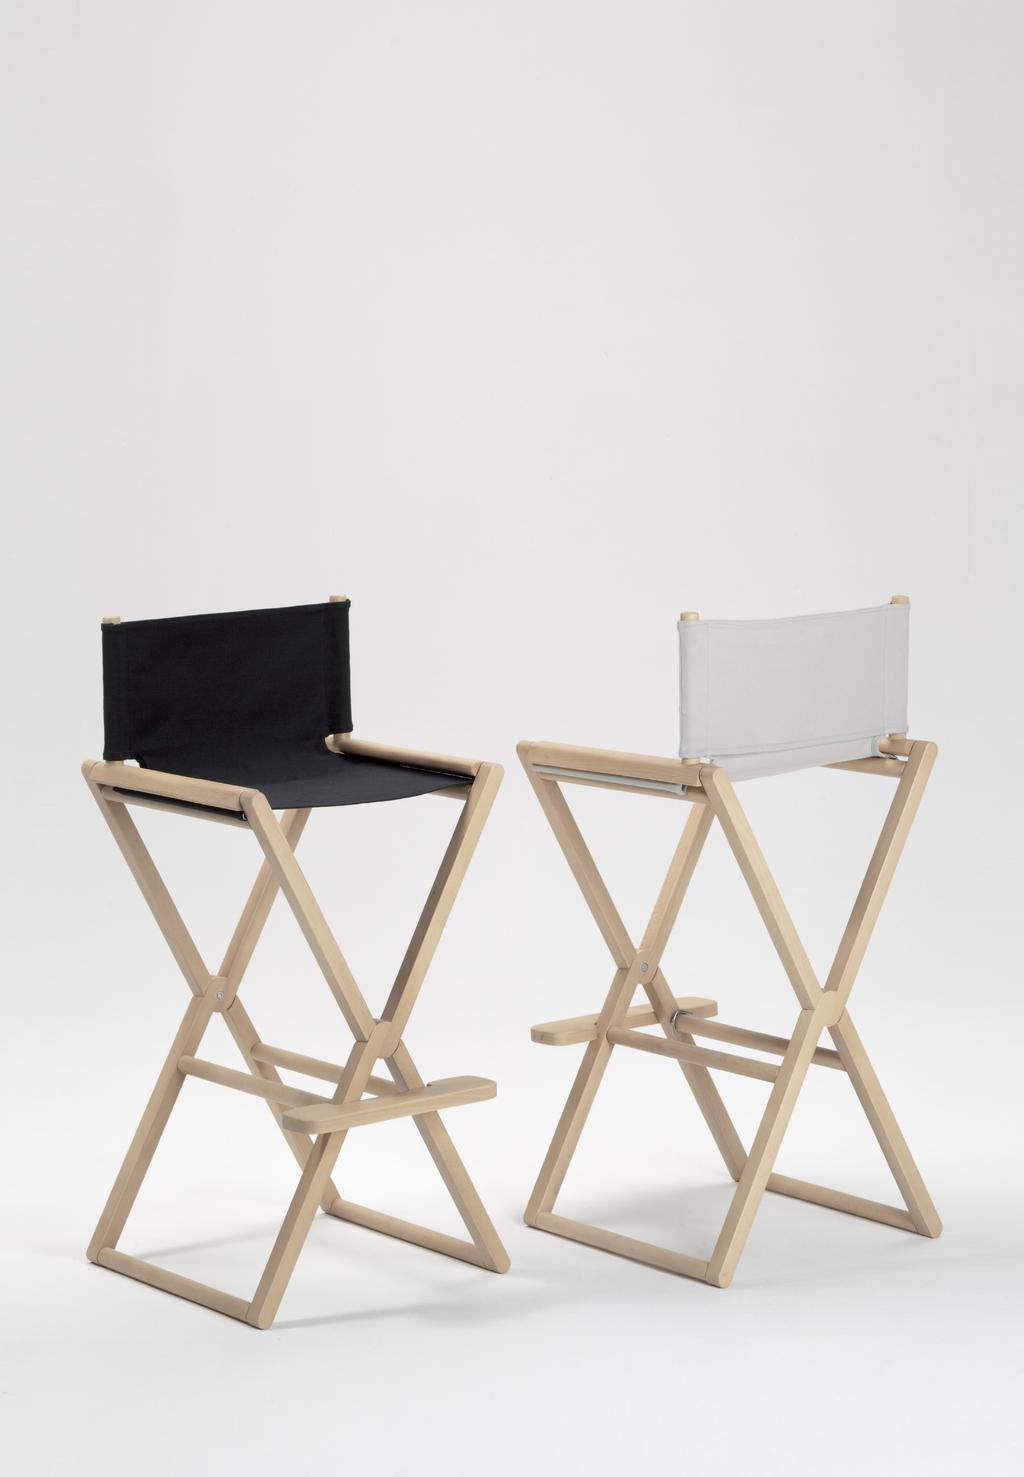 Foldable, lightweight and easy to handle the treee set family is proposed as a practical seat